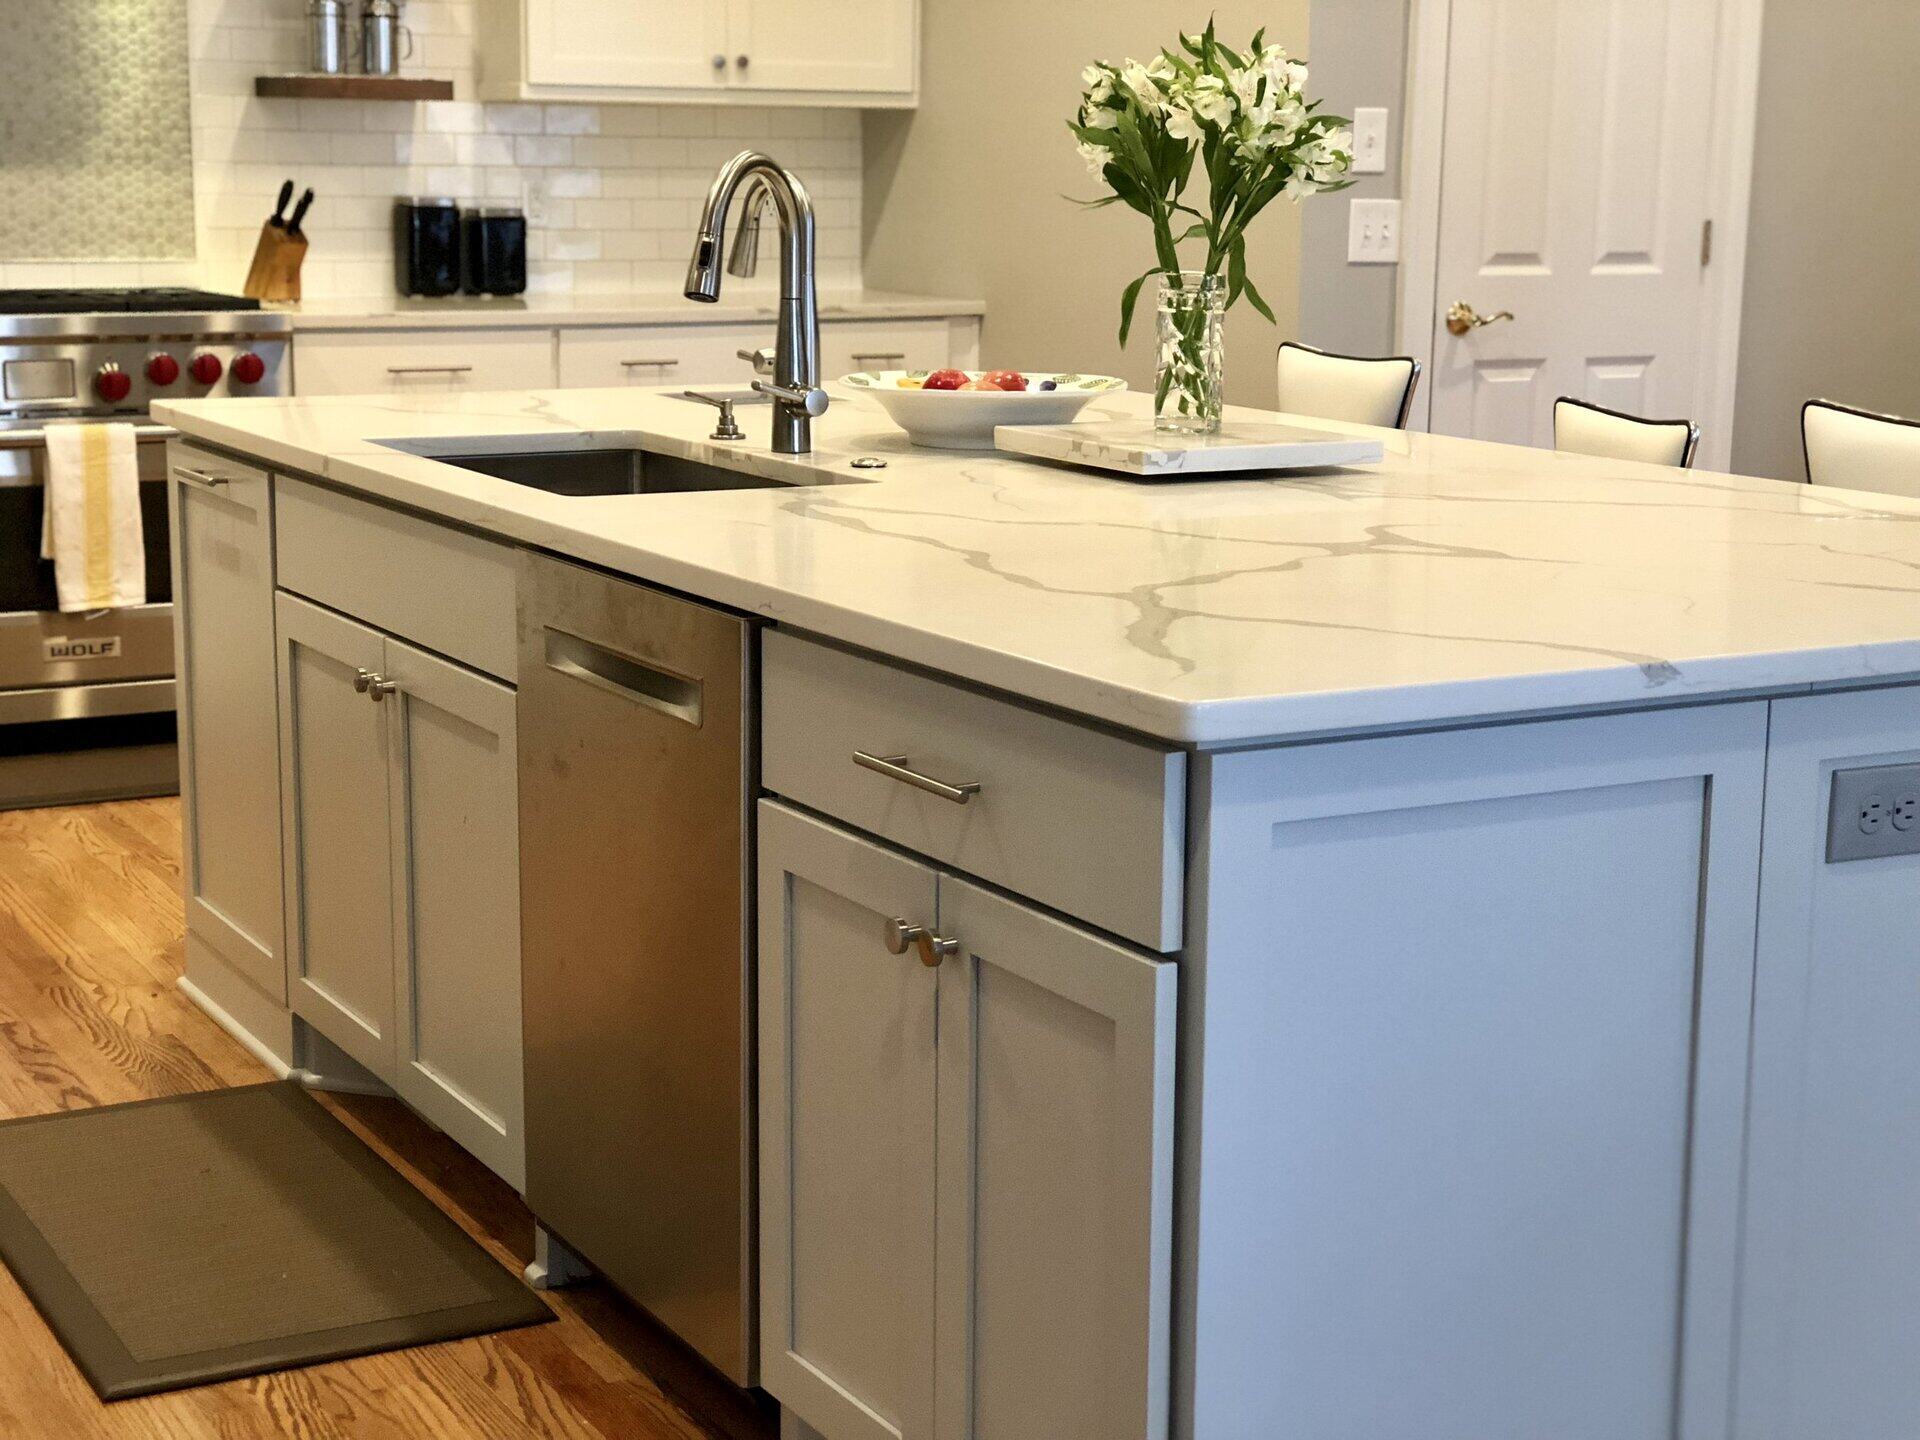 Where To Buy Kitchen Island With Sink And Dishwasher